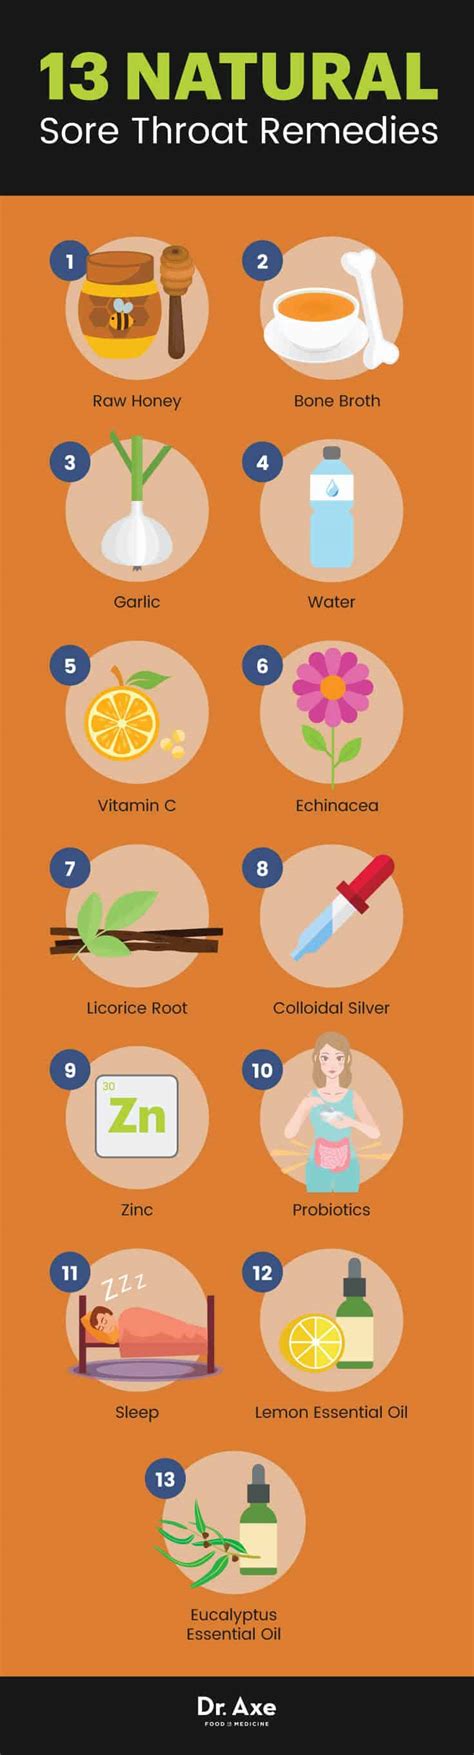 People with a sore throat often experience difficulty swallowing liquids and foods. 13 Natural Sore Throat Remedies for Fast Relief - Dr. Axe